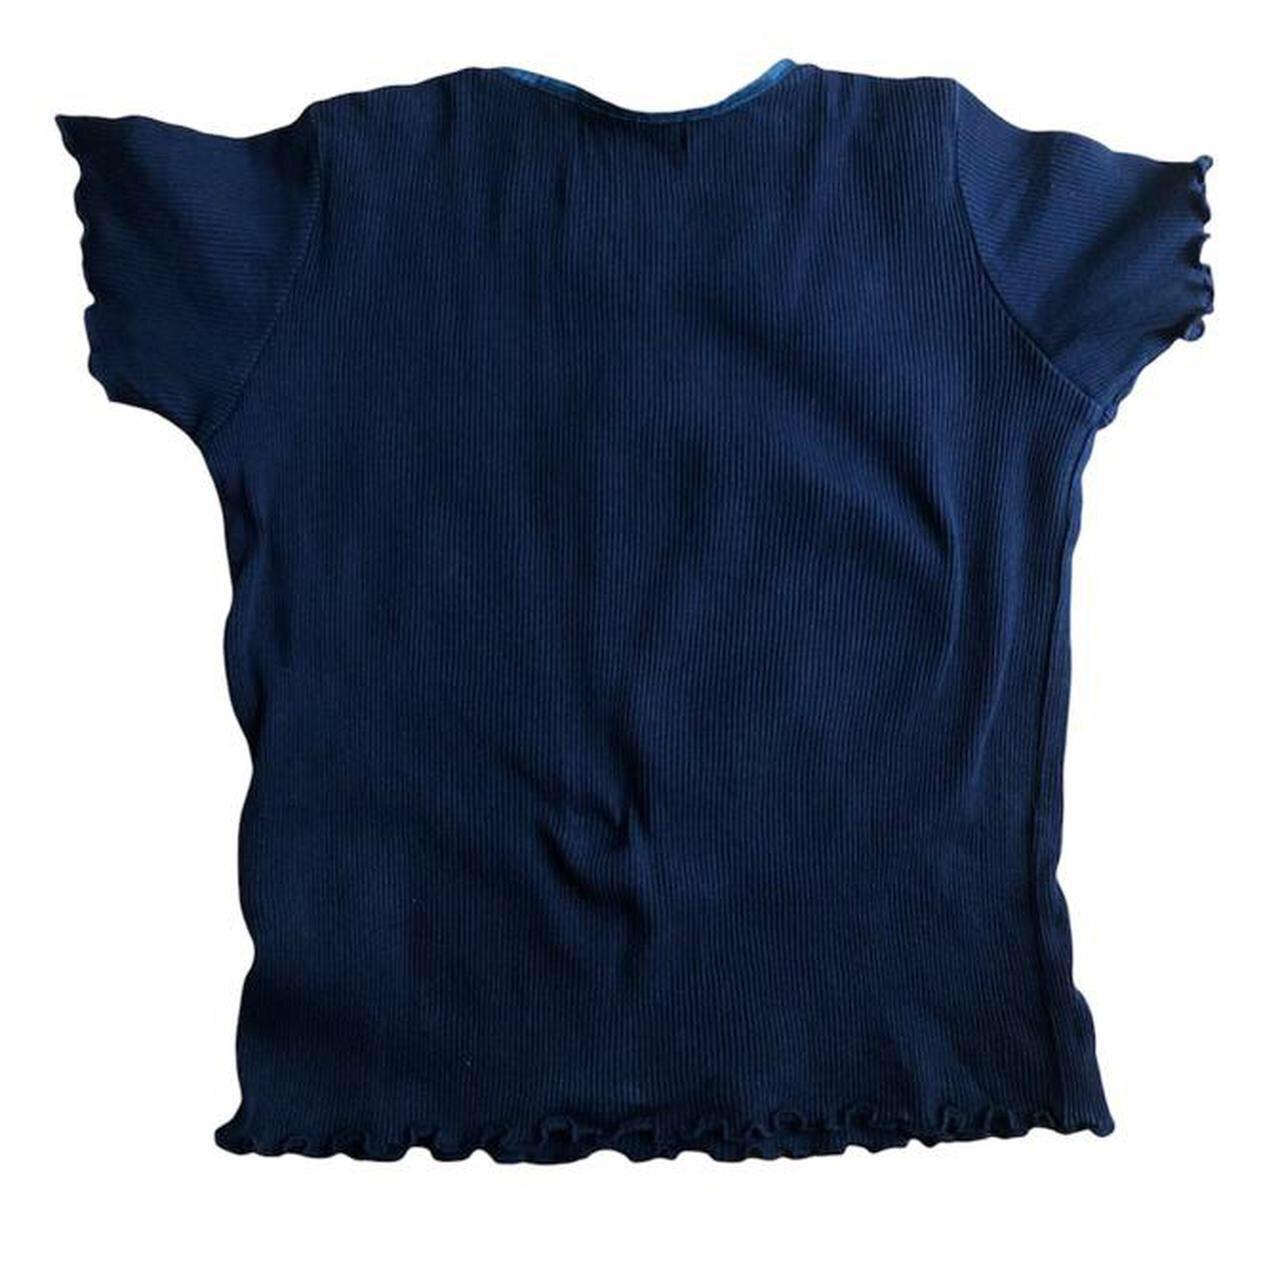 Early 2000s Navy Blue Flower Top with an Embroidered... - Depop